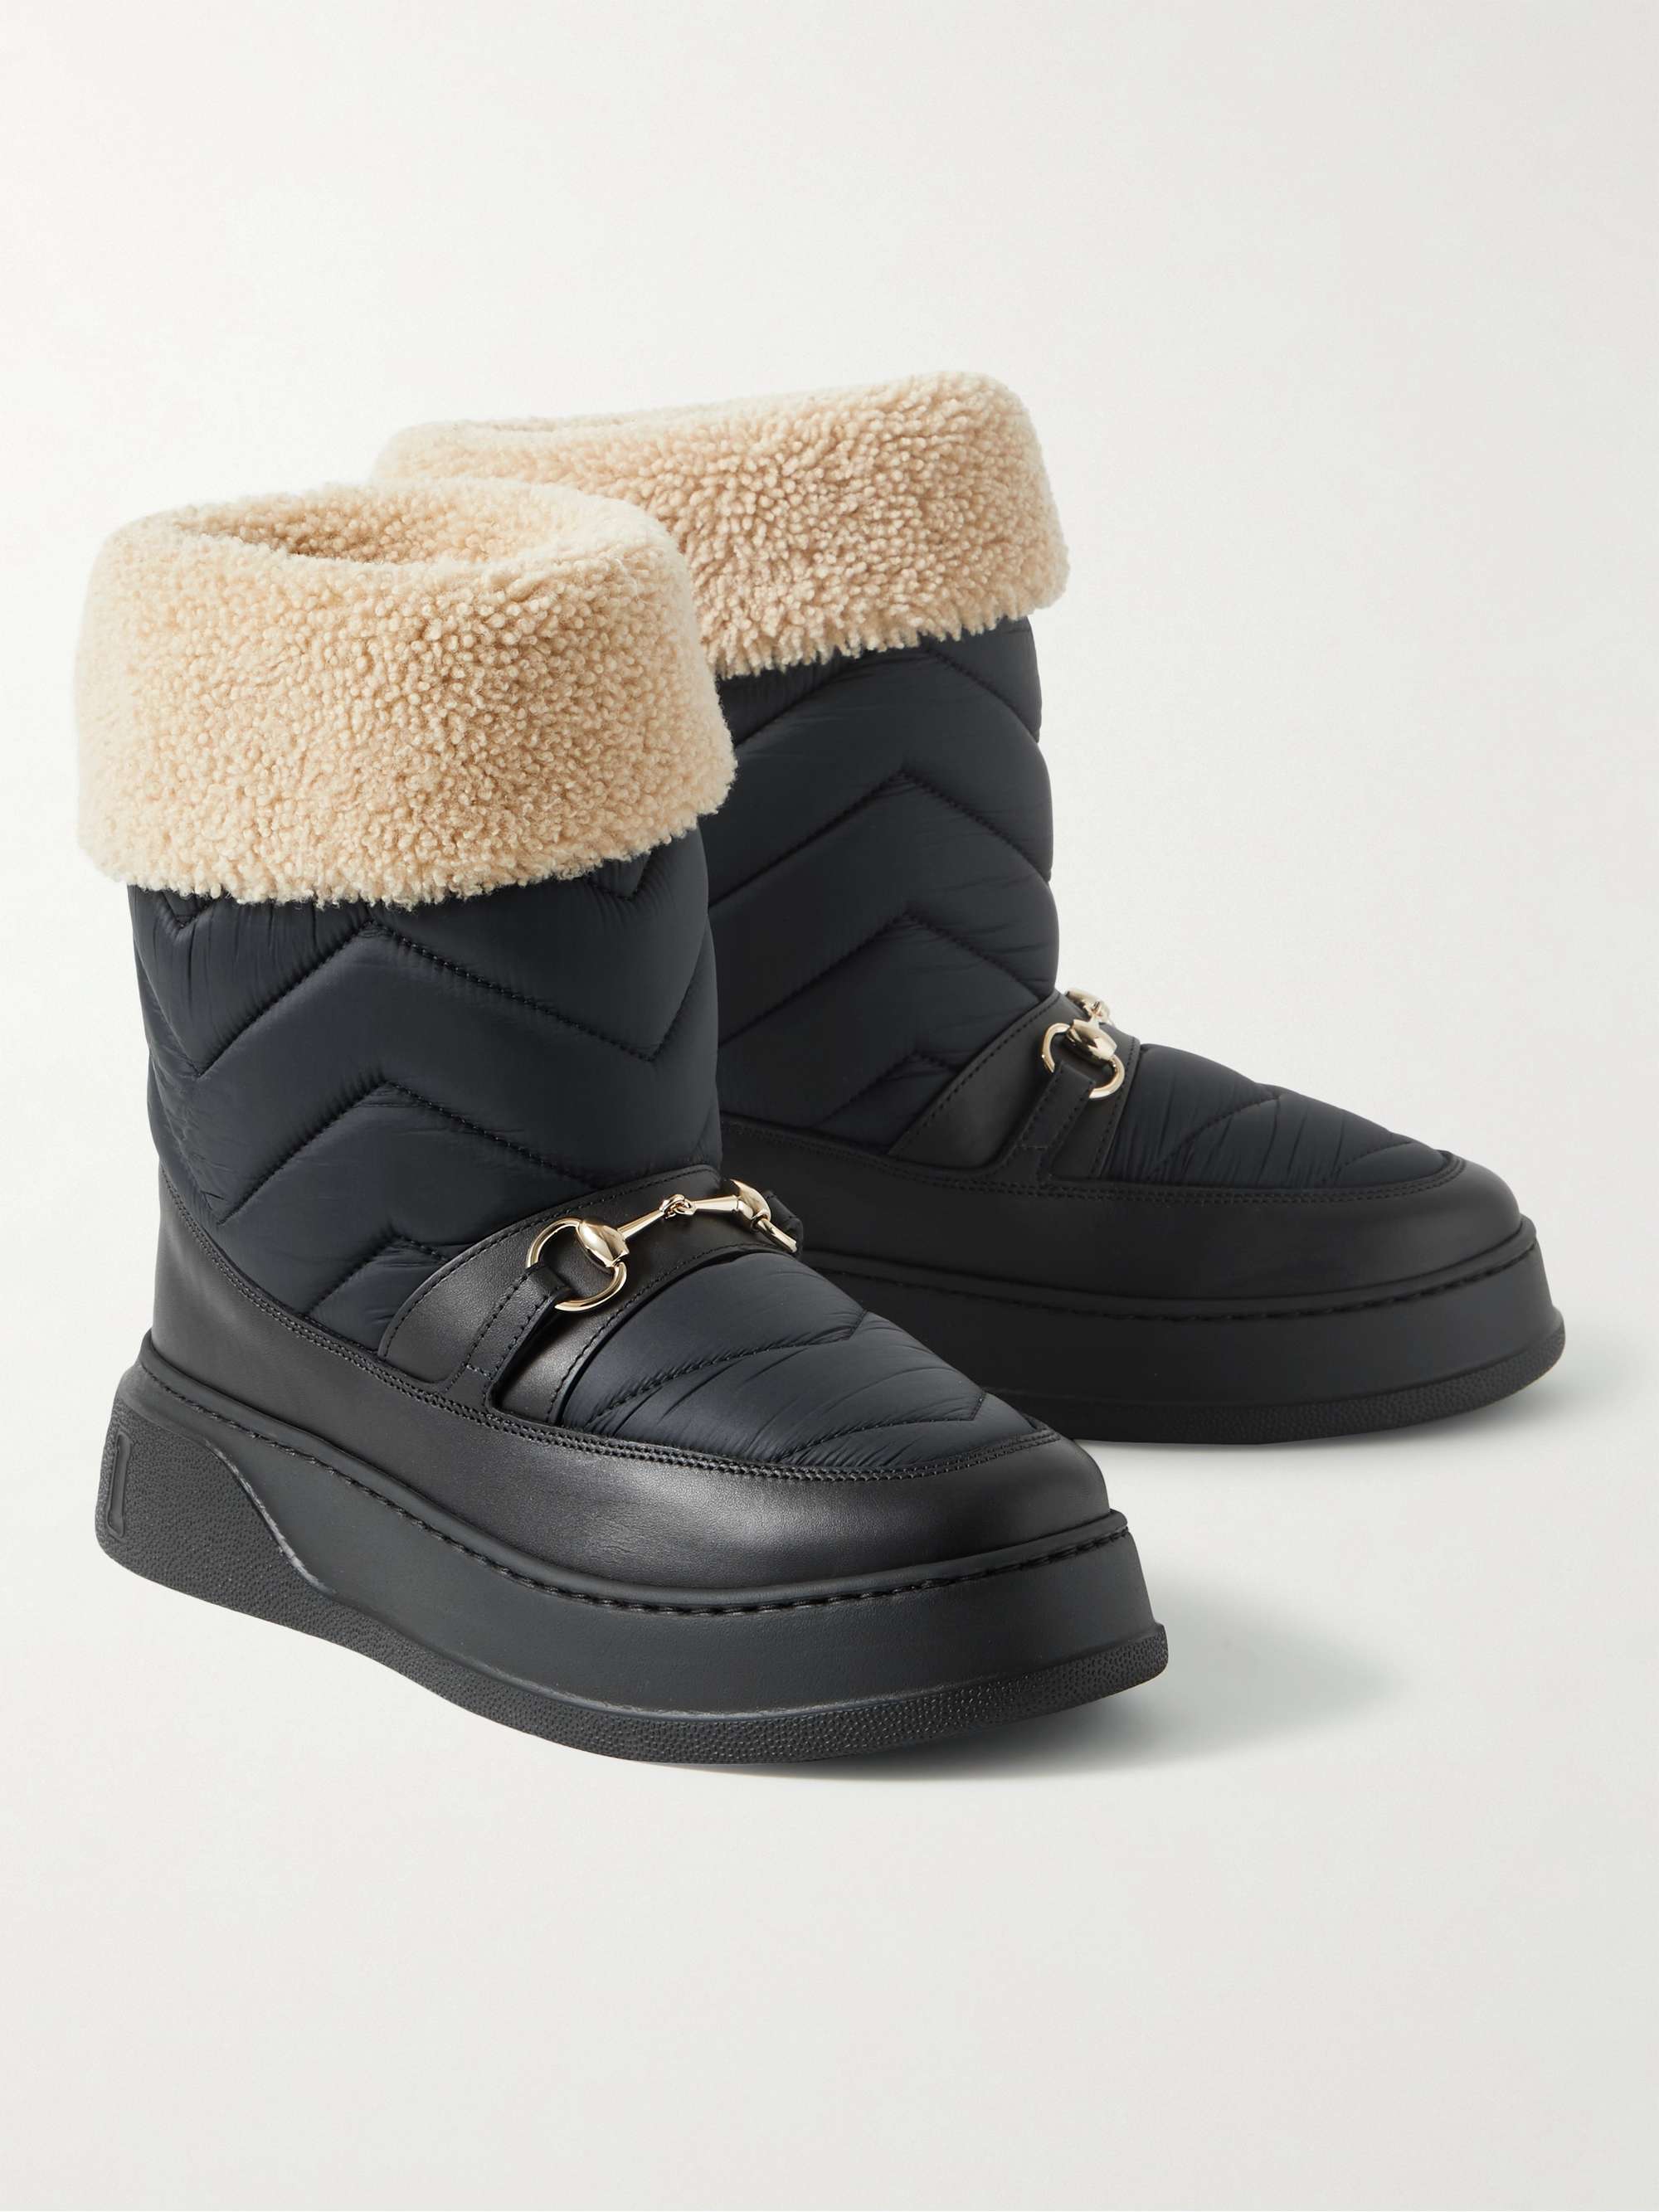 GUCCI Horsebit Shearling-Trimmed Quilted Nylon and Leather Boots